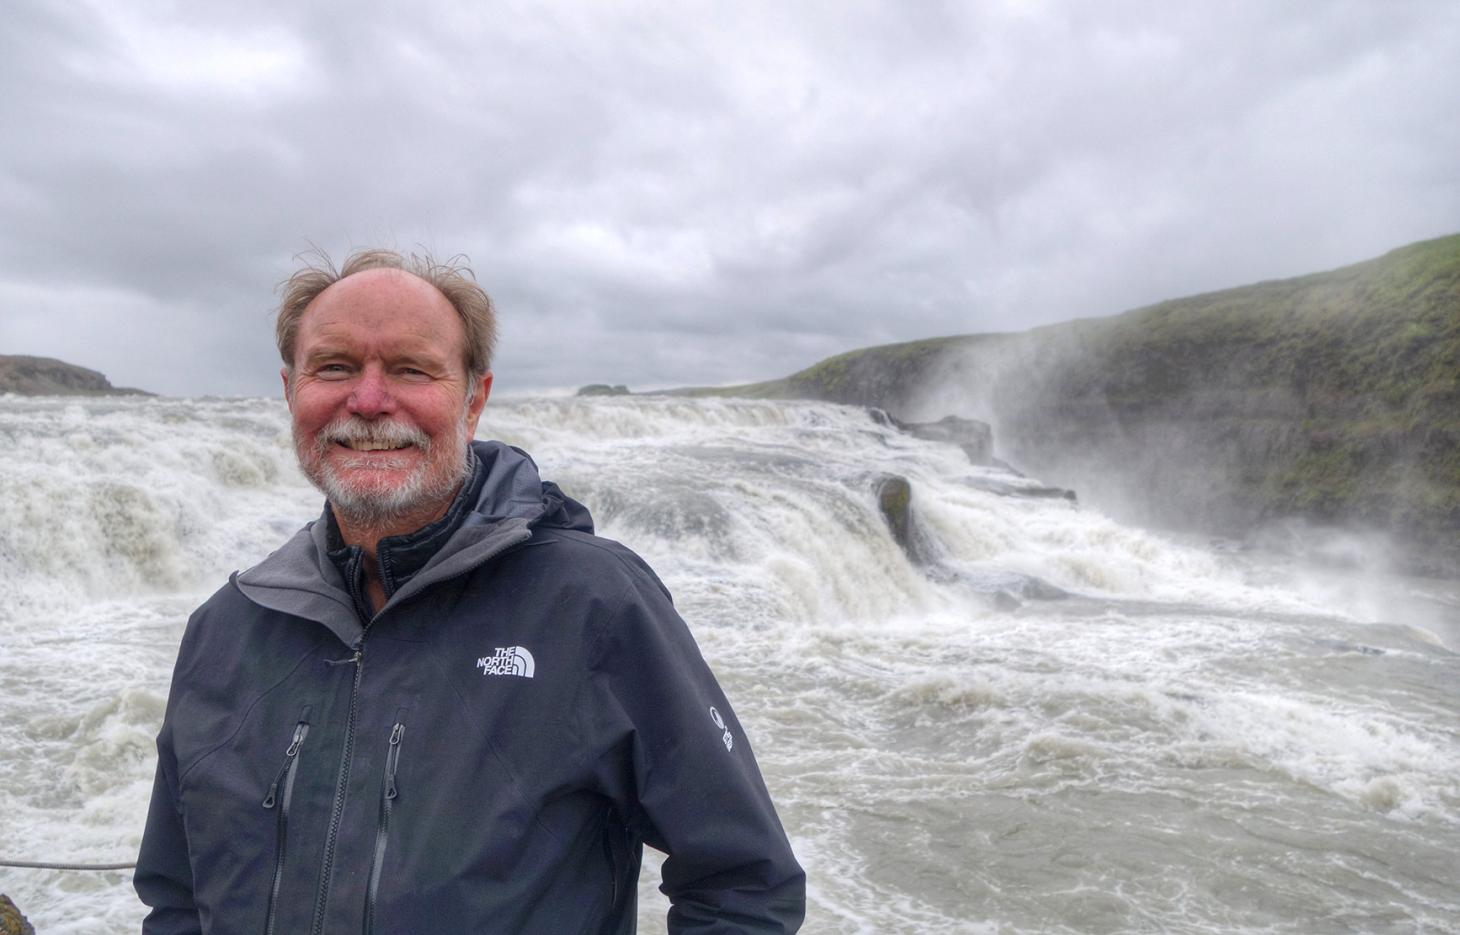 Joel Peterson standing in front of white water rapids.